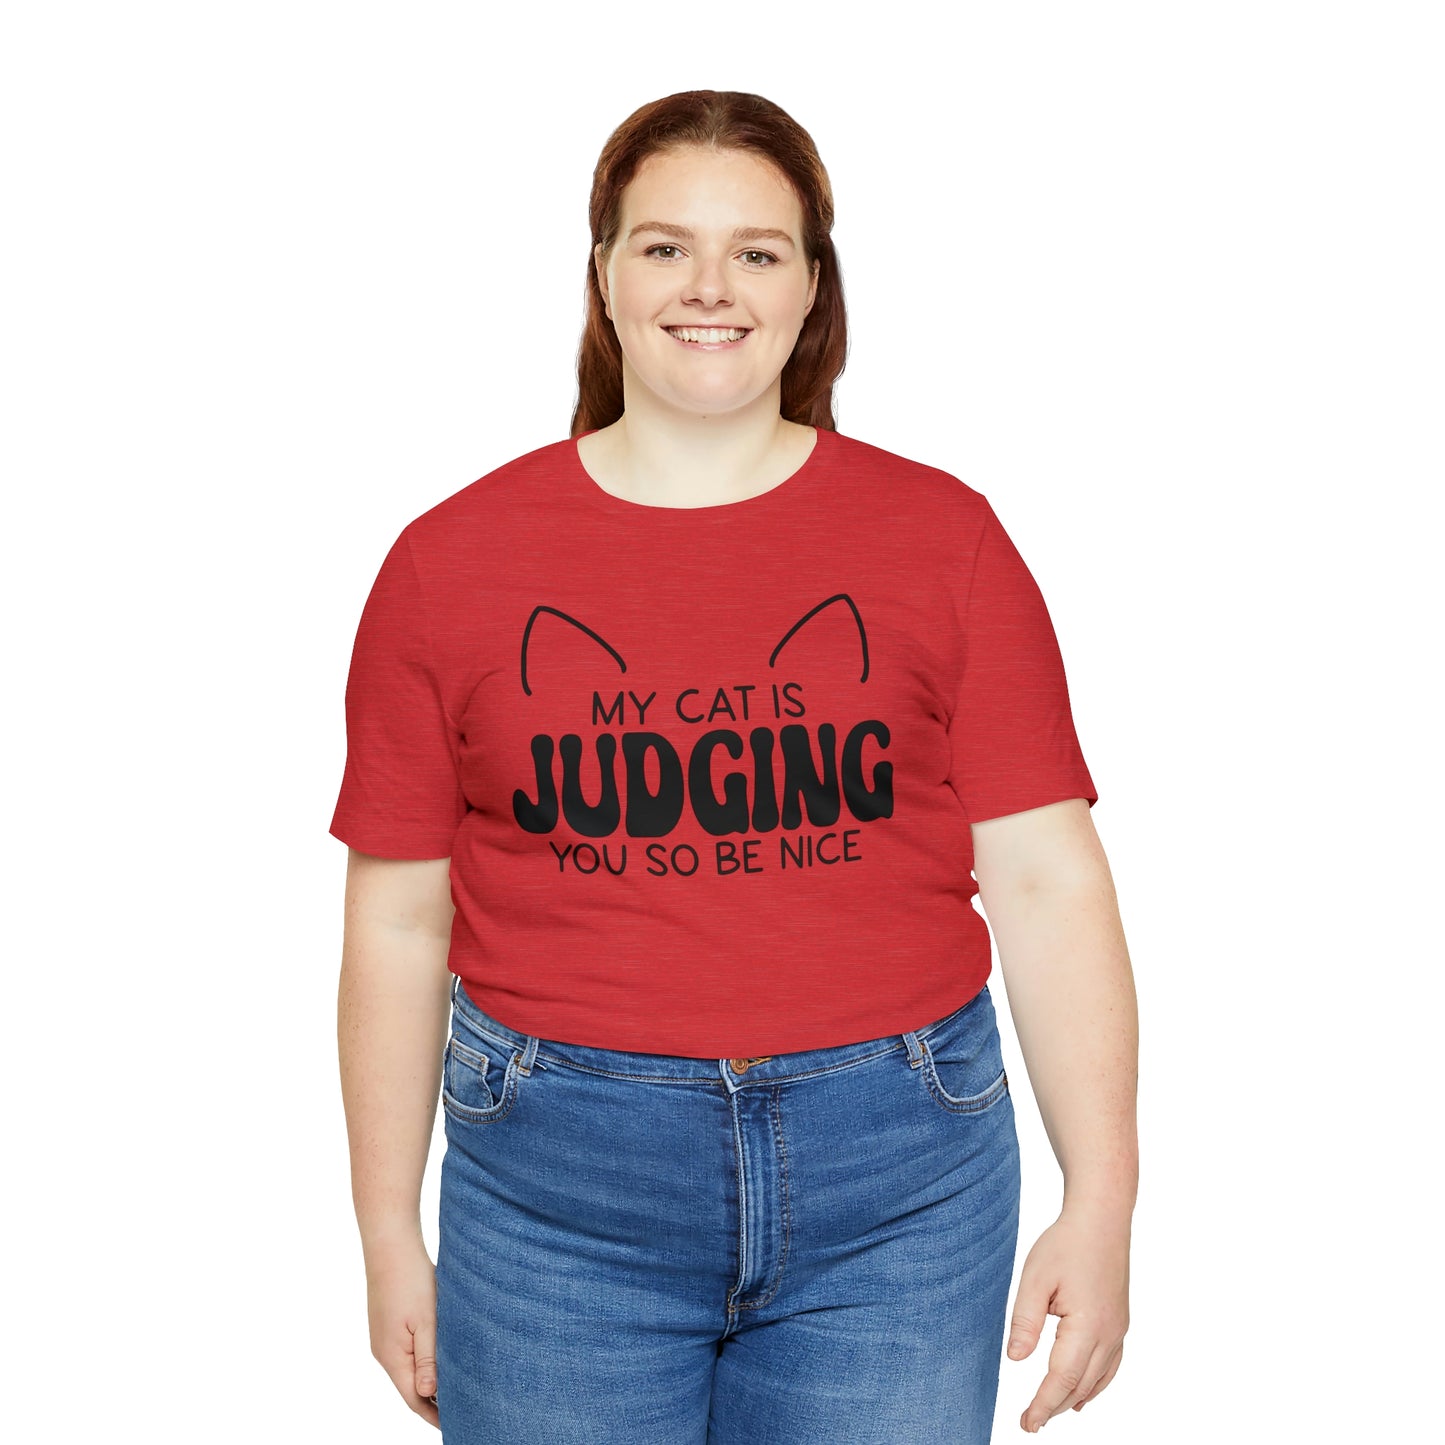 My Cat is Judging You So Be Nice Short Sleeve T-shirt